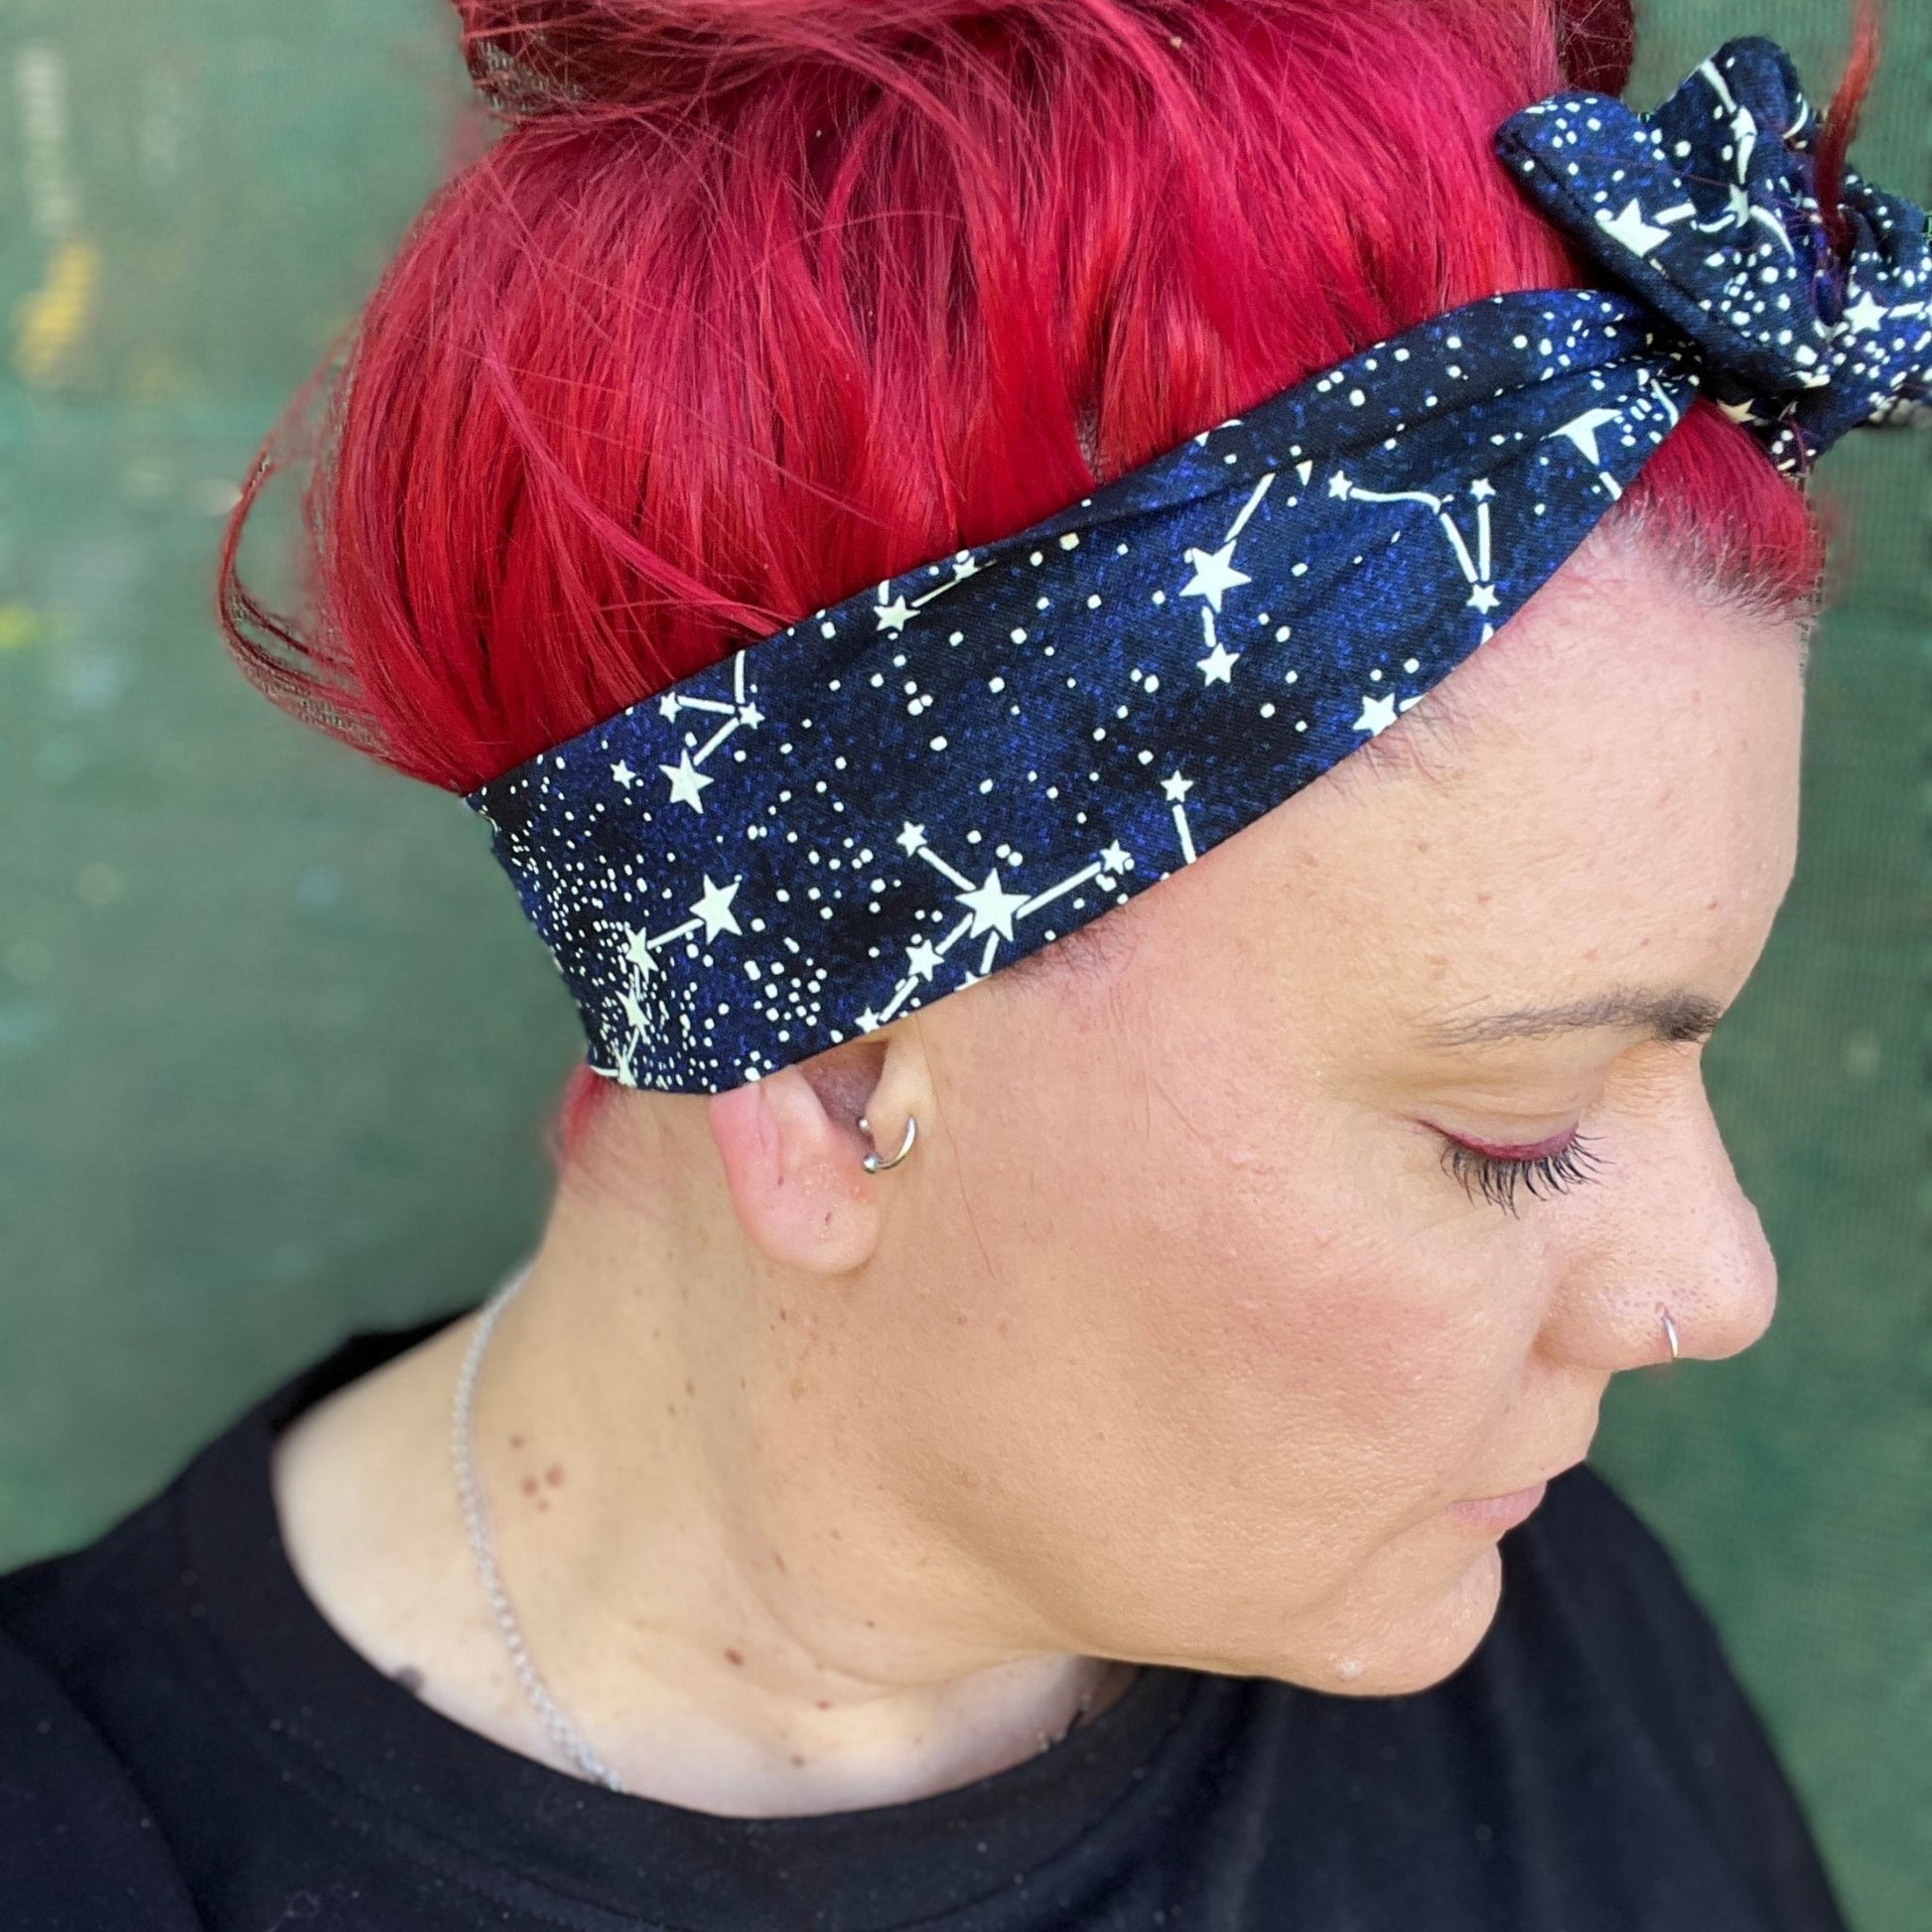 Glow in the dark stars wire headband Explore our collection of hair accessories for girls, featuring headbands and scrunchies, all made in Australia. Perfect for adding a touch of charm and style to any outfit, our locally crafted pieces ensure durability and fashion. Shop the latest in girl’s hair trends today!